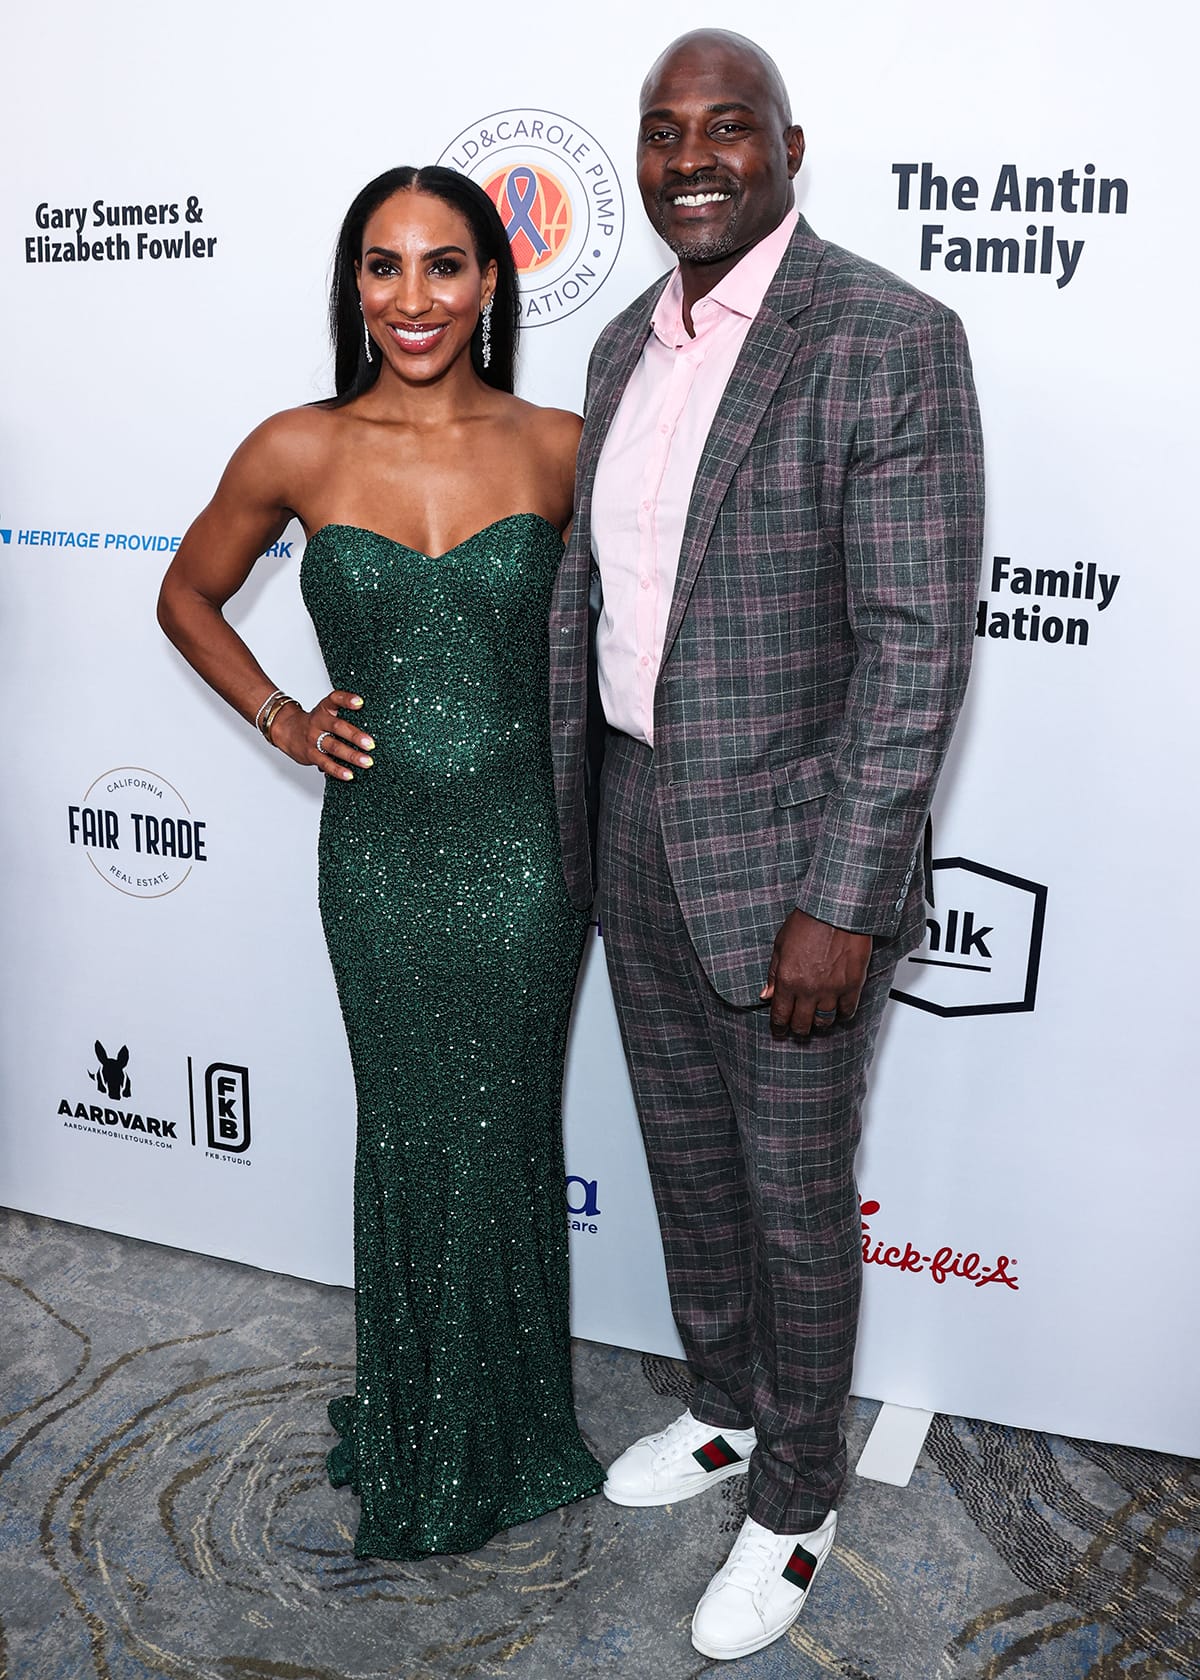 Annemarie Wiley is married to former NFL player Marcellus Wiley, who boasts a net worth of $5 million